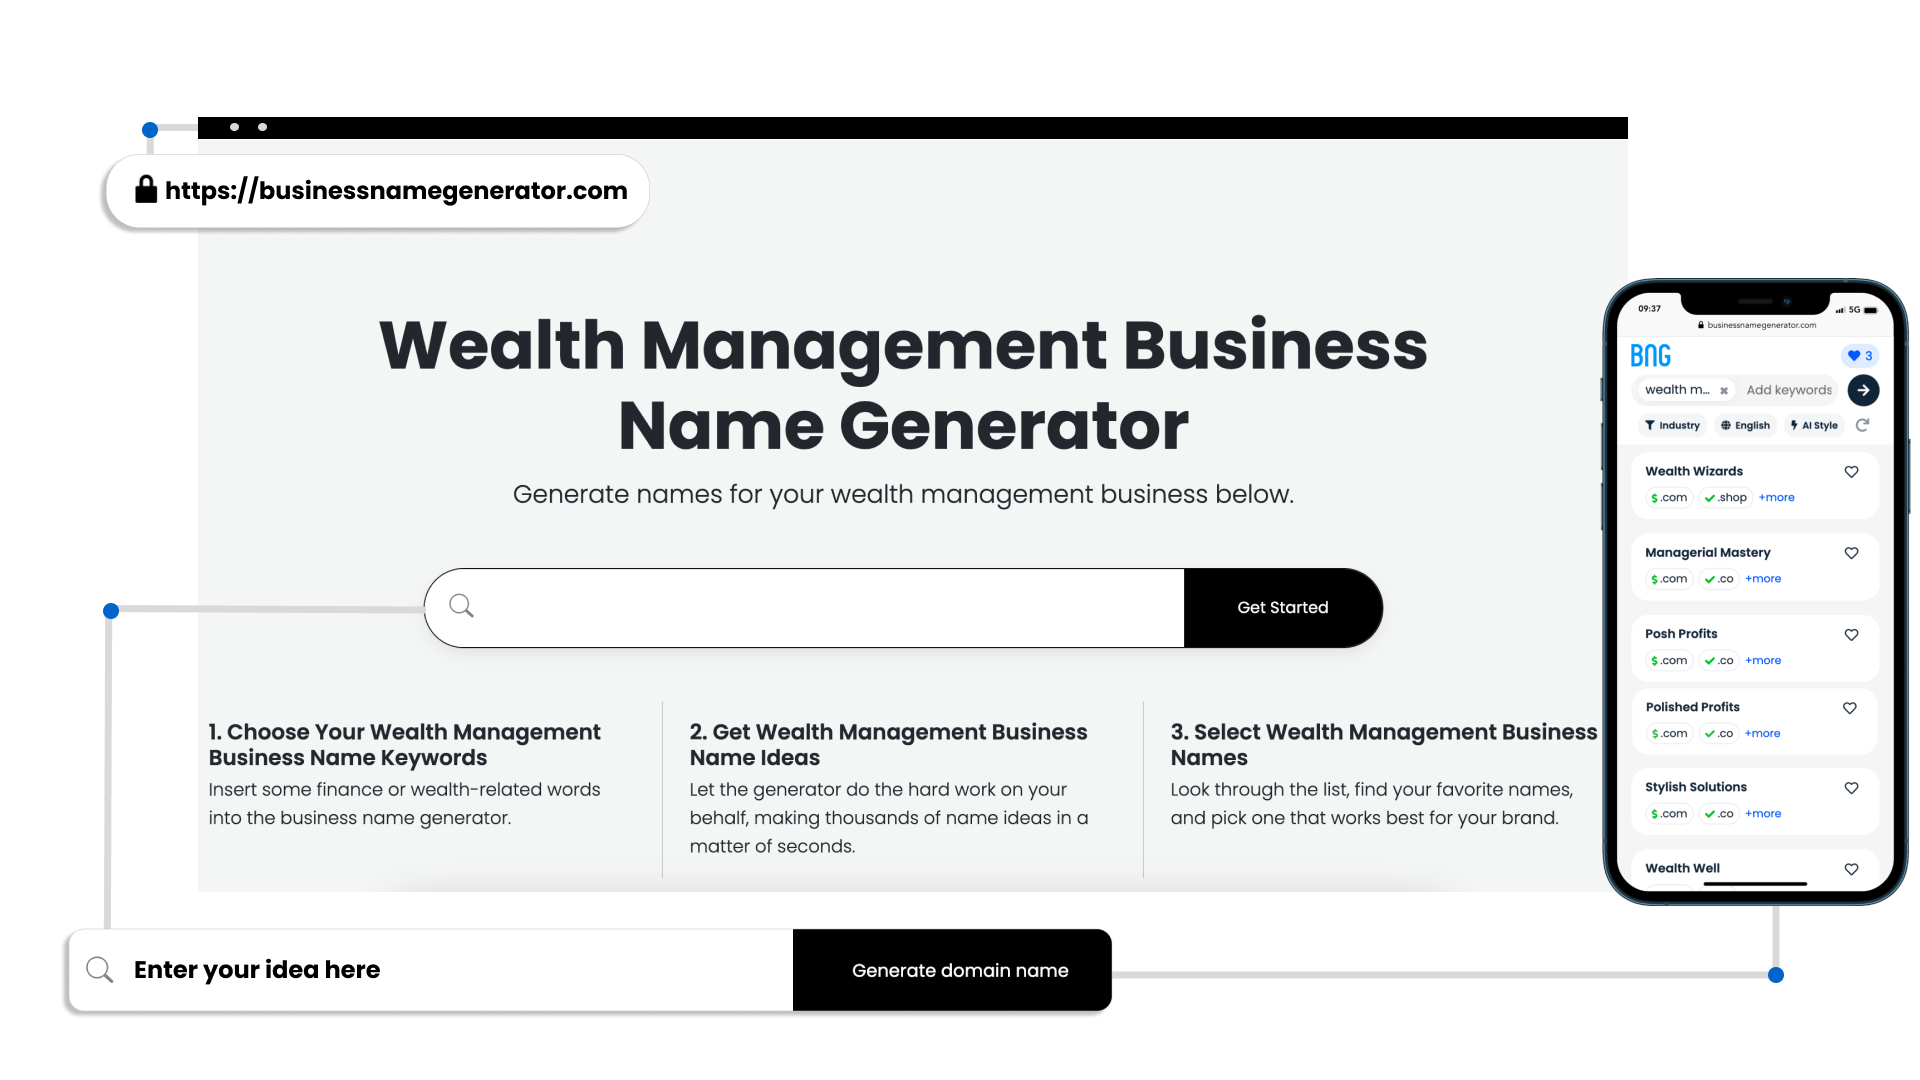 Why Should You Consider Our Wealth Management Business Name Generator